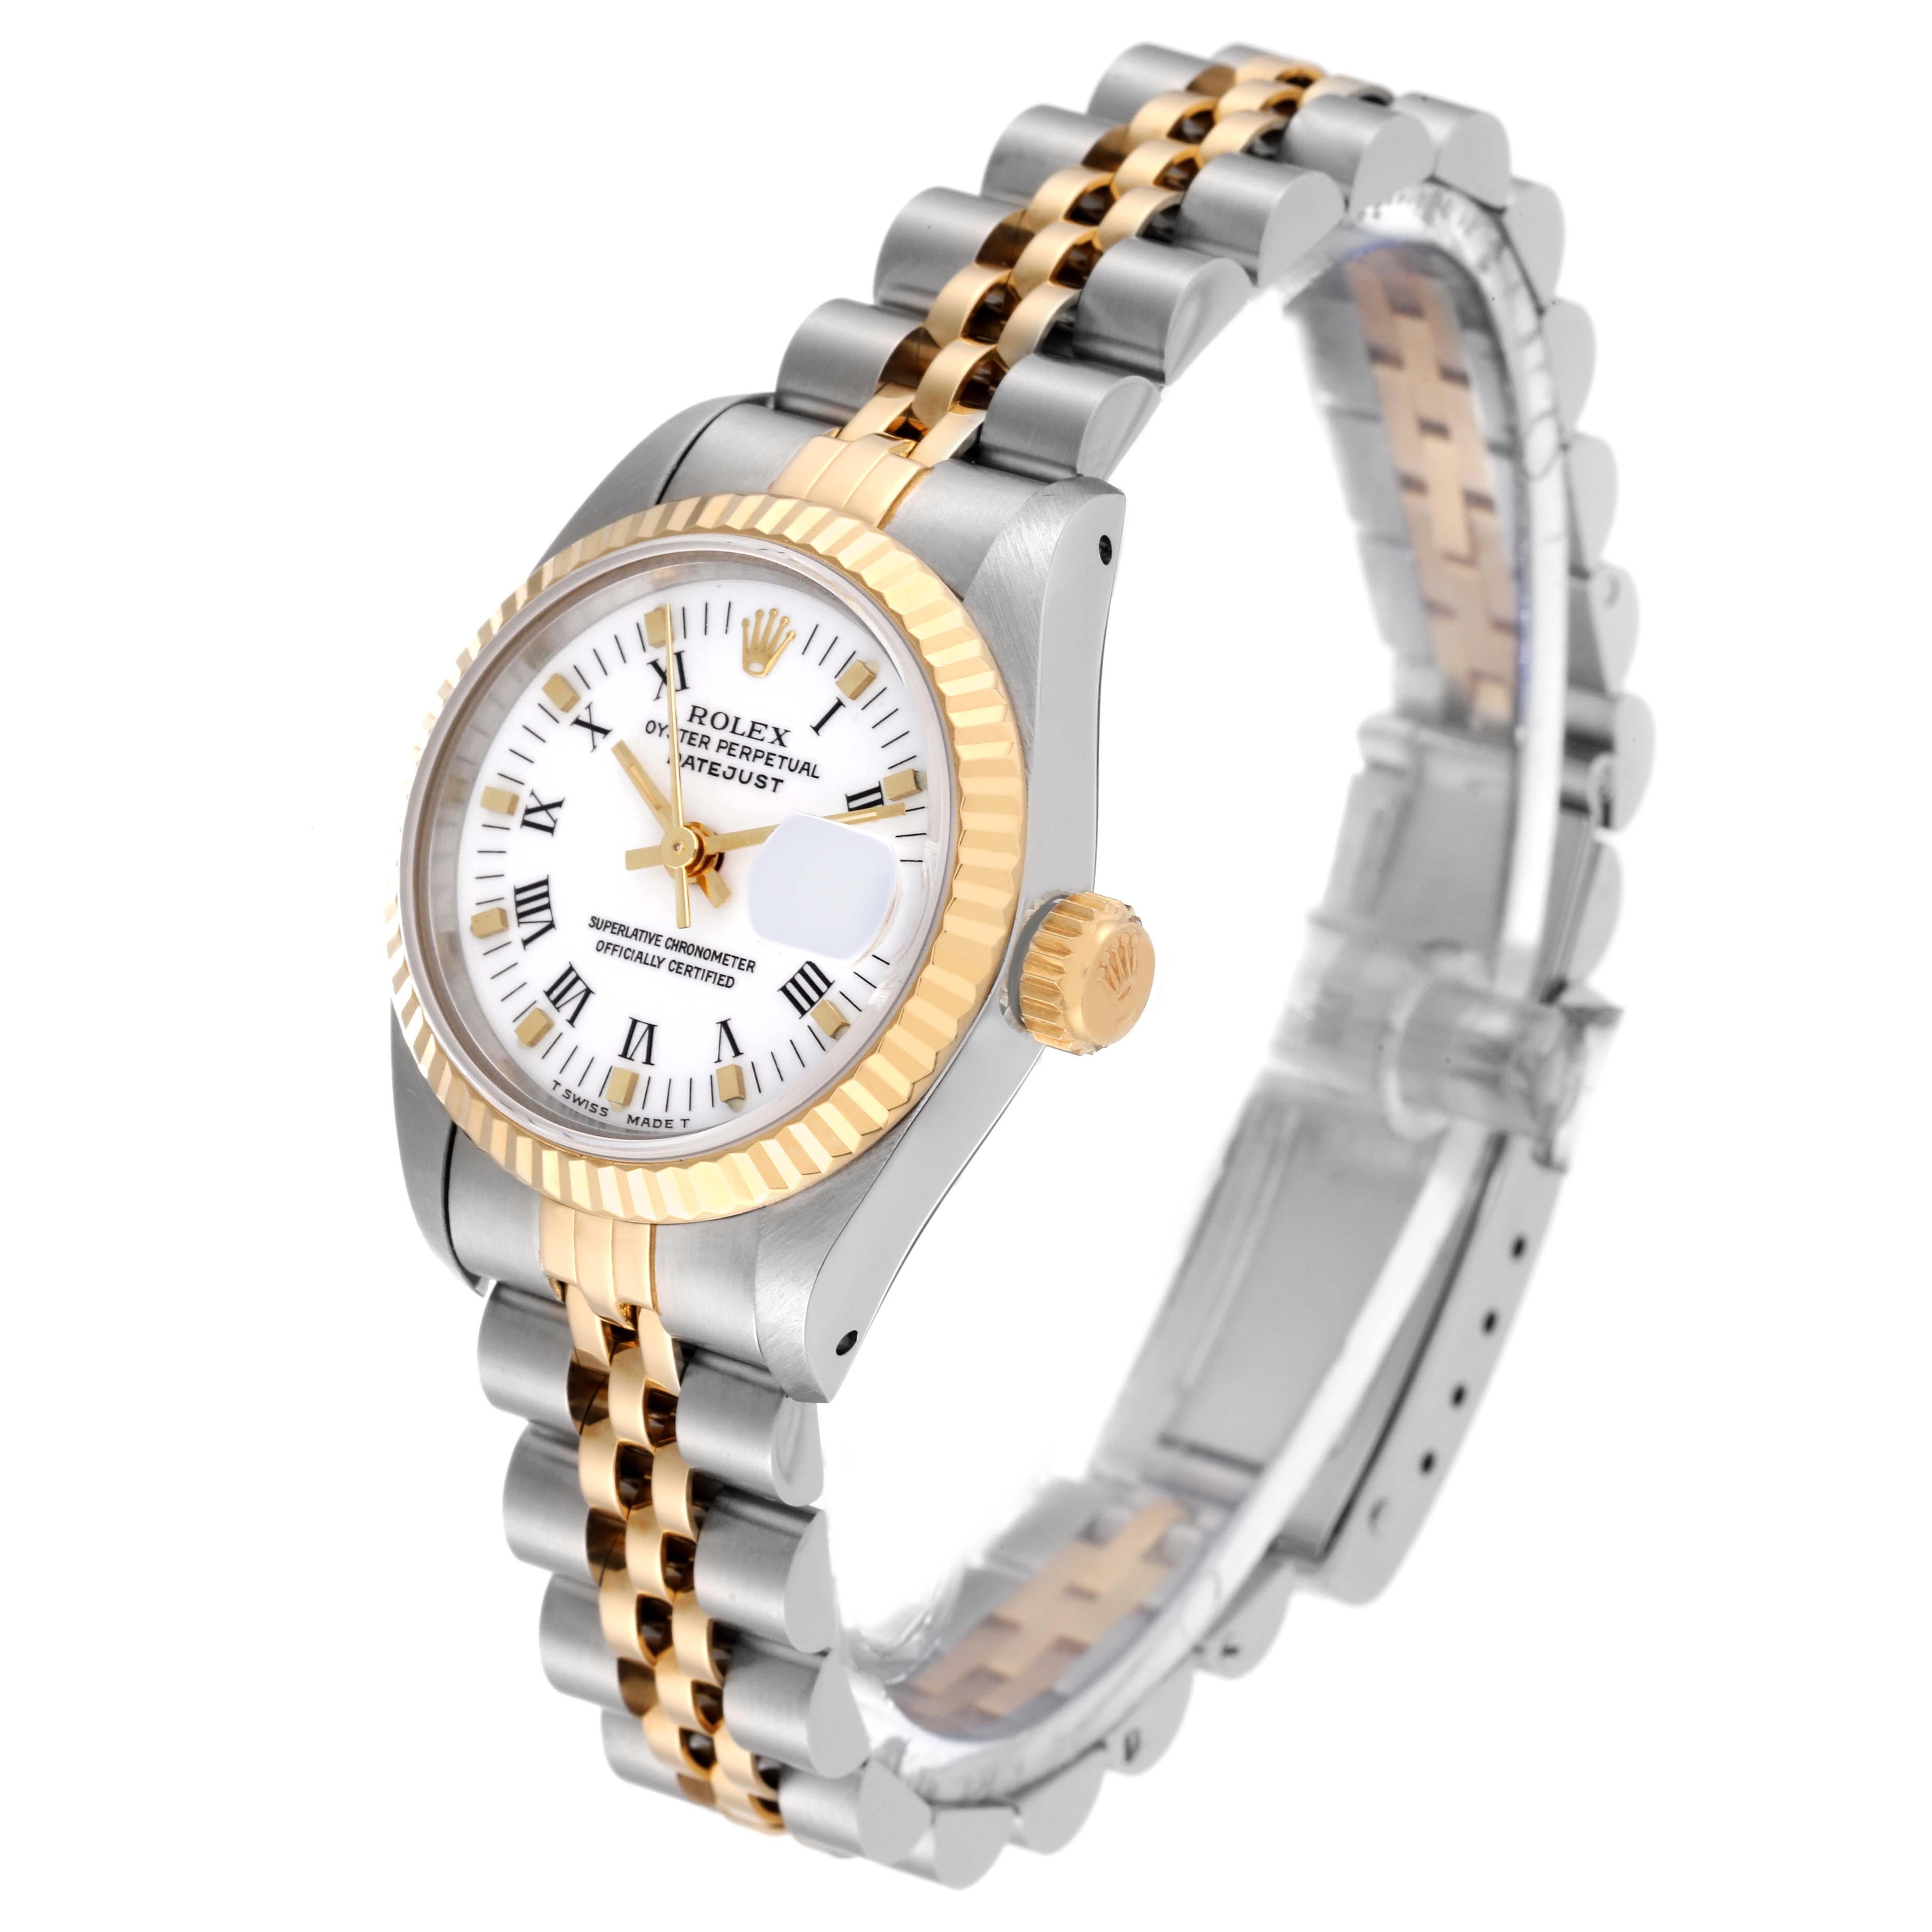 Women's Rolex Datejust Steel Yellow Gold White Dial Ladies Watch 69173 Box Papers